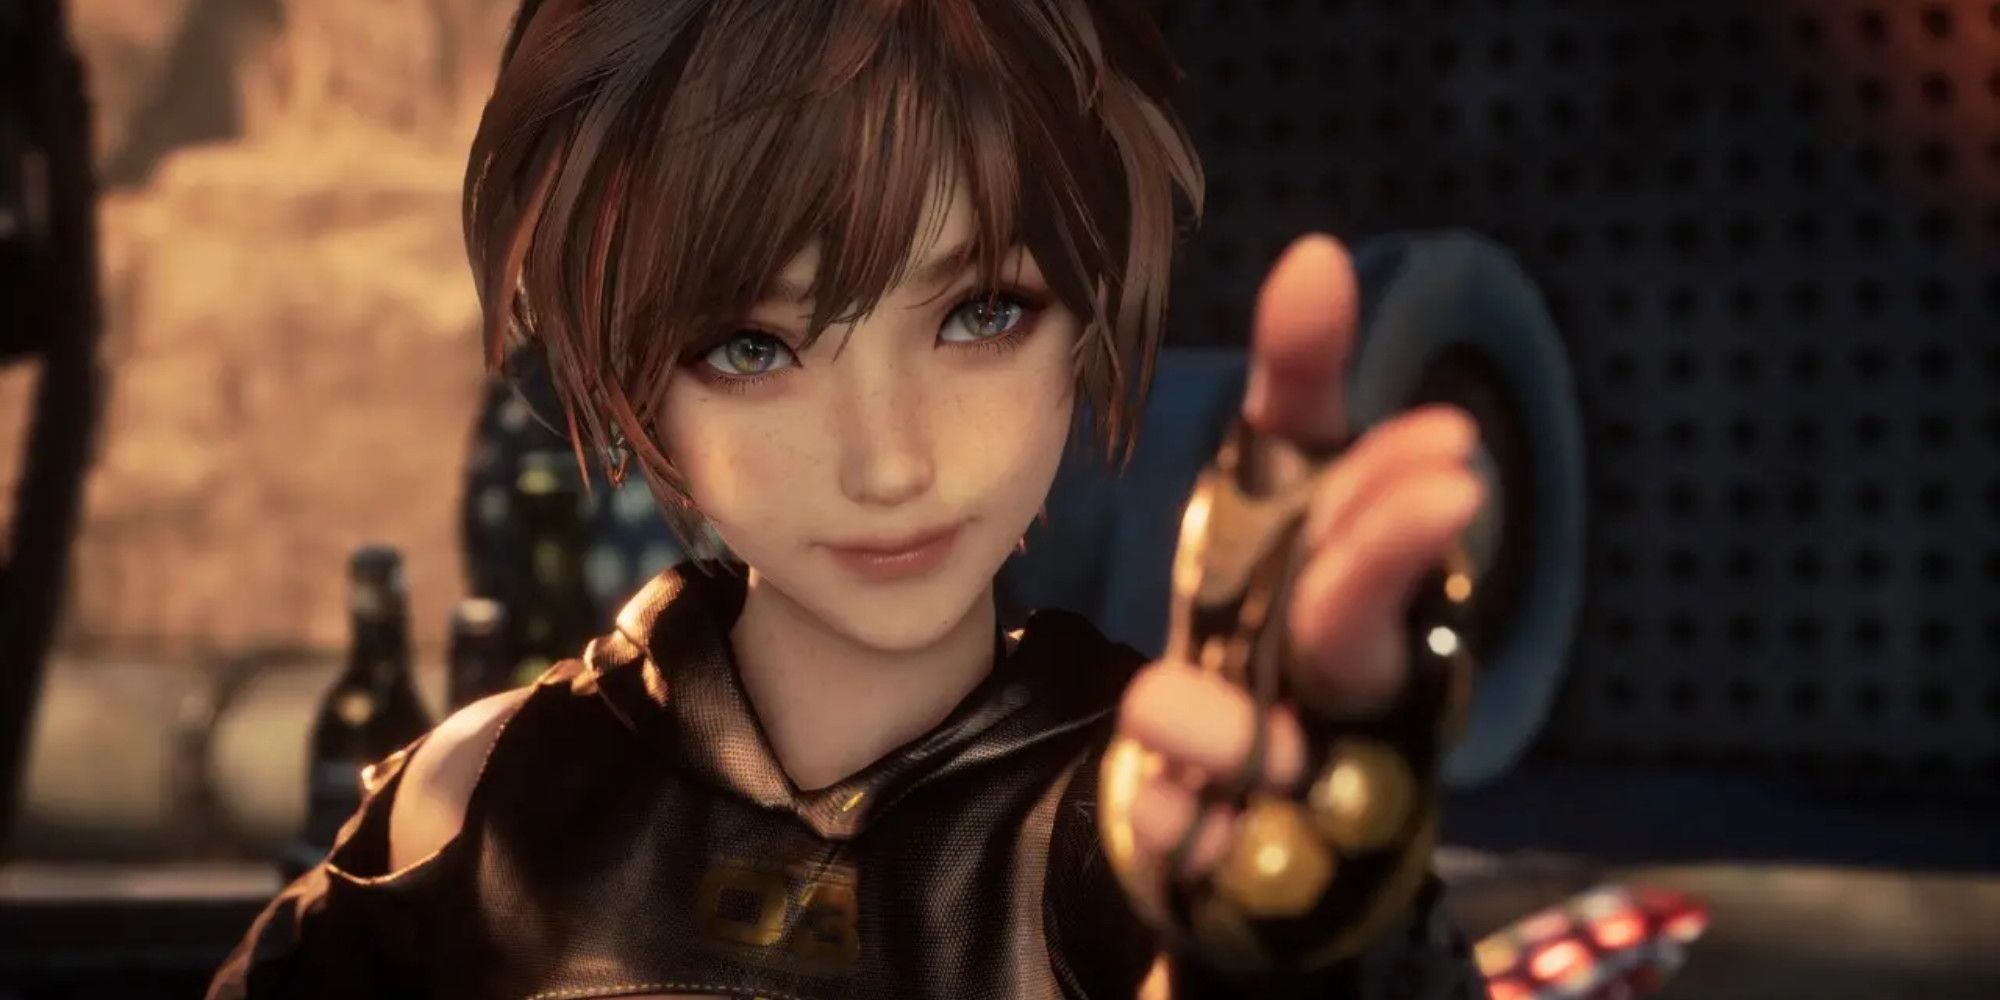 A young girl with short brown hair pointing at the screen with her hand in the shape of a gun